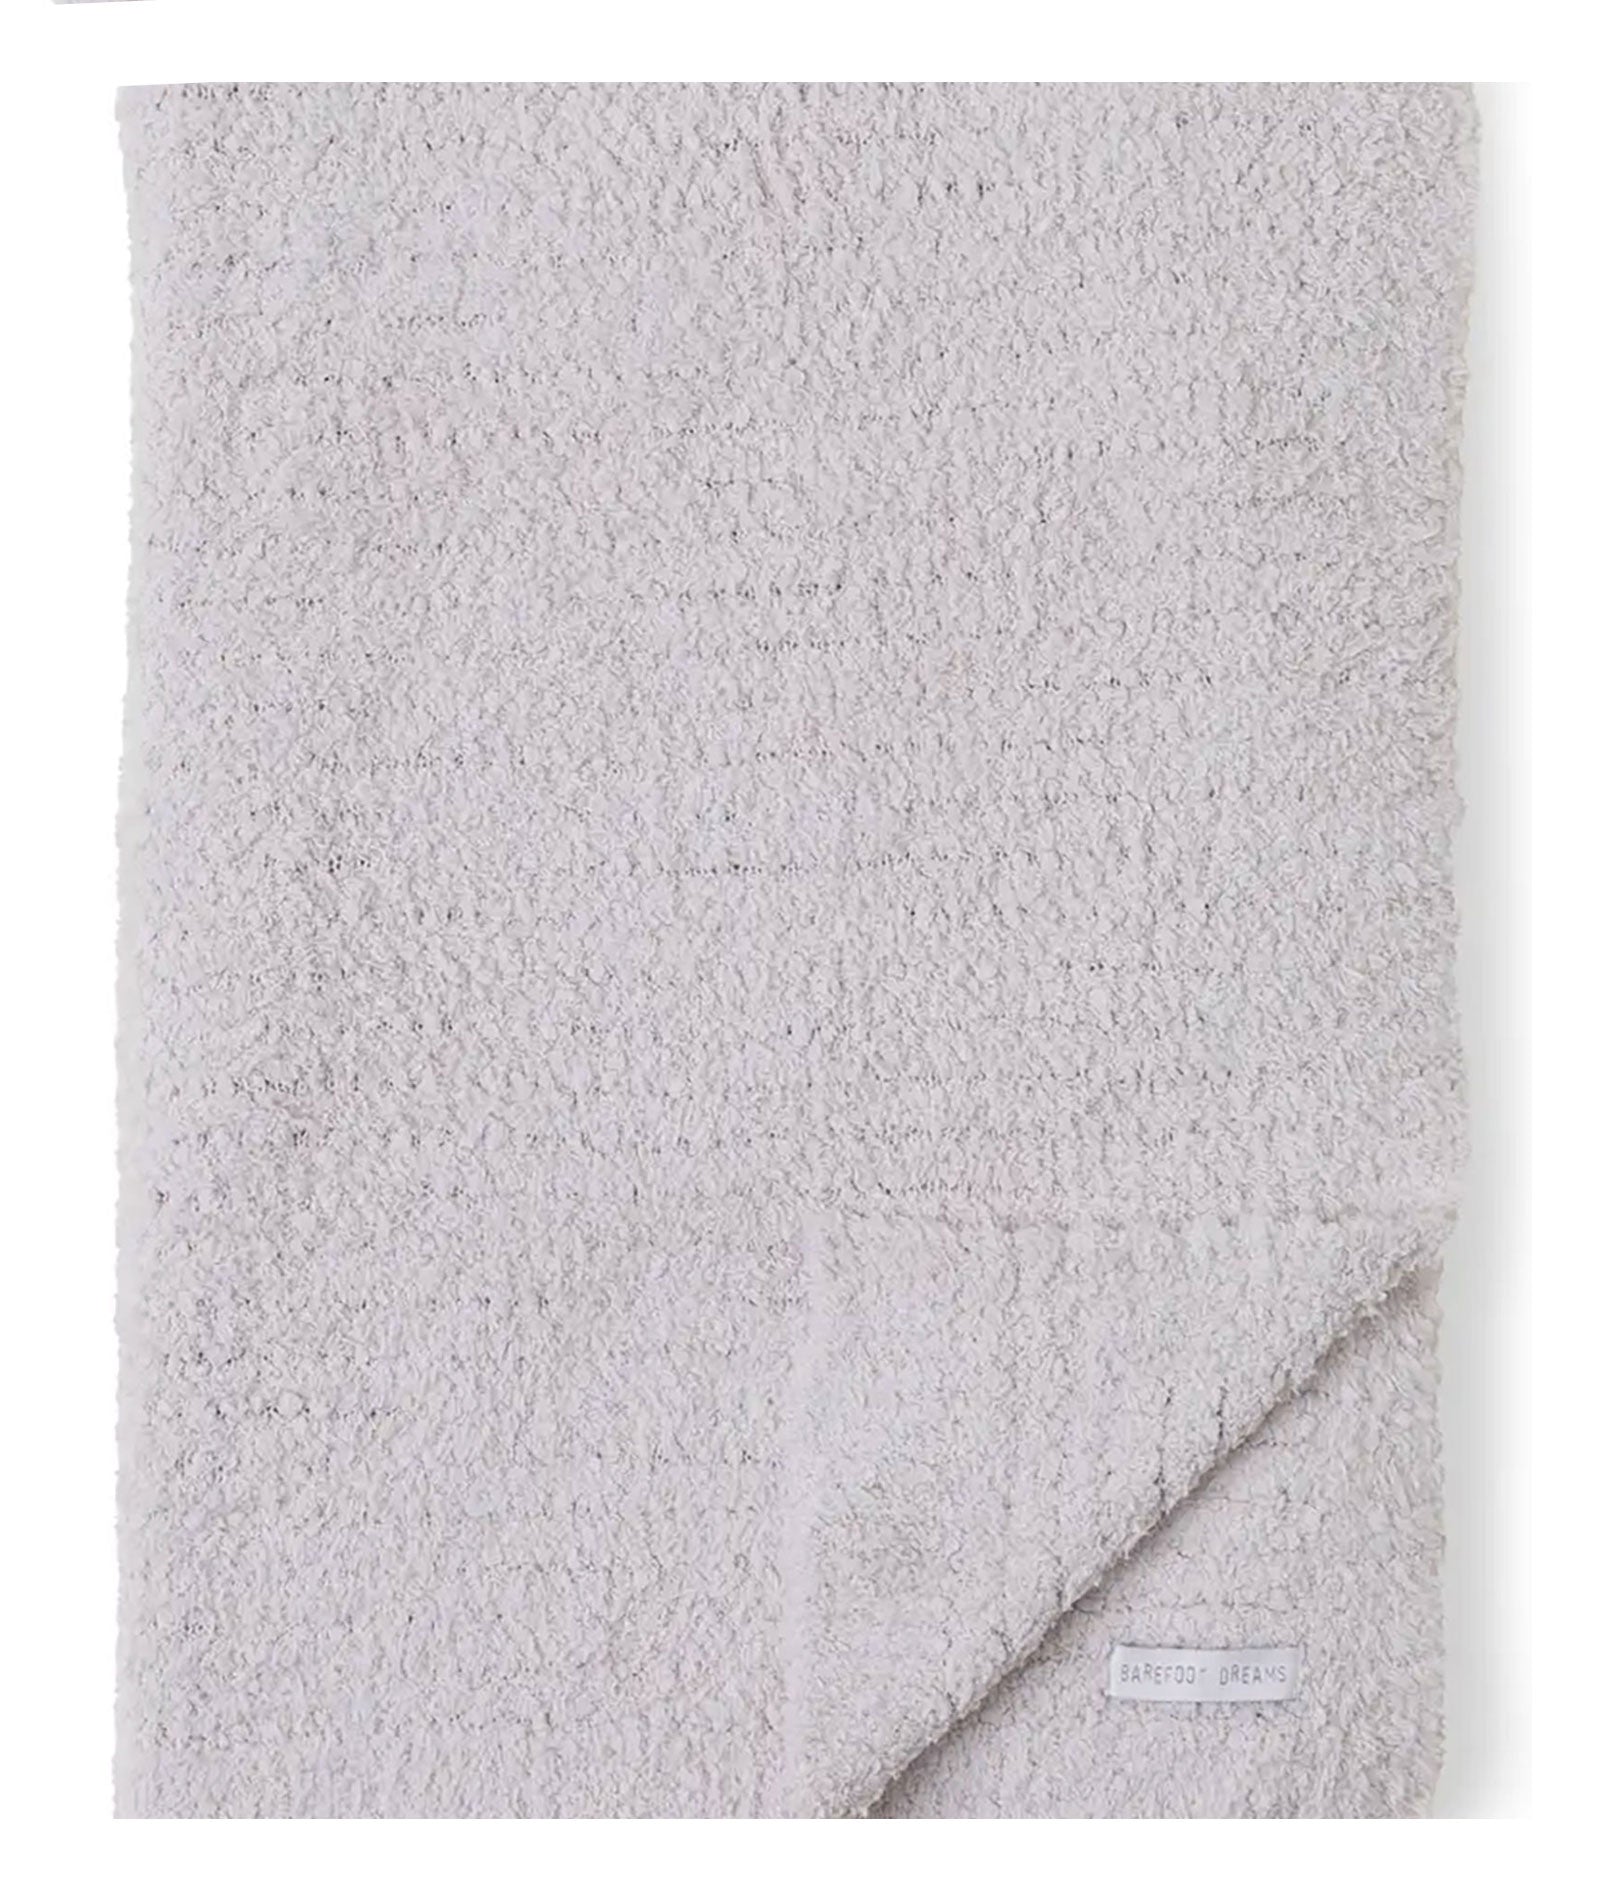 Barefoot Dreams CozyChic Boucle Blanket Scarf 